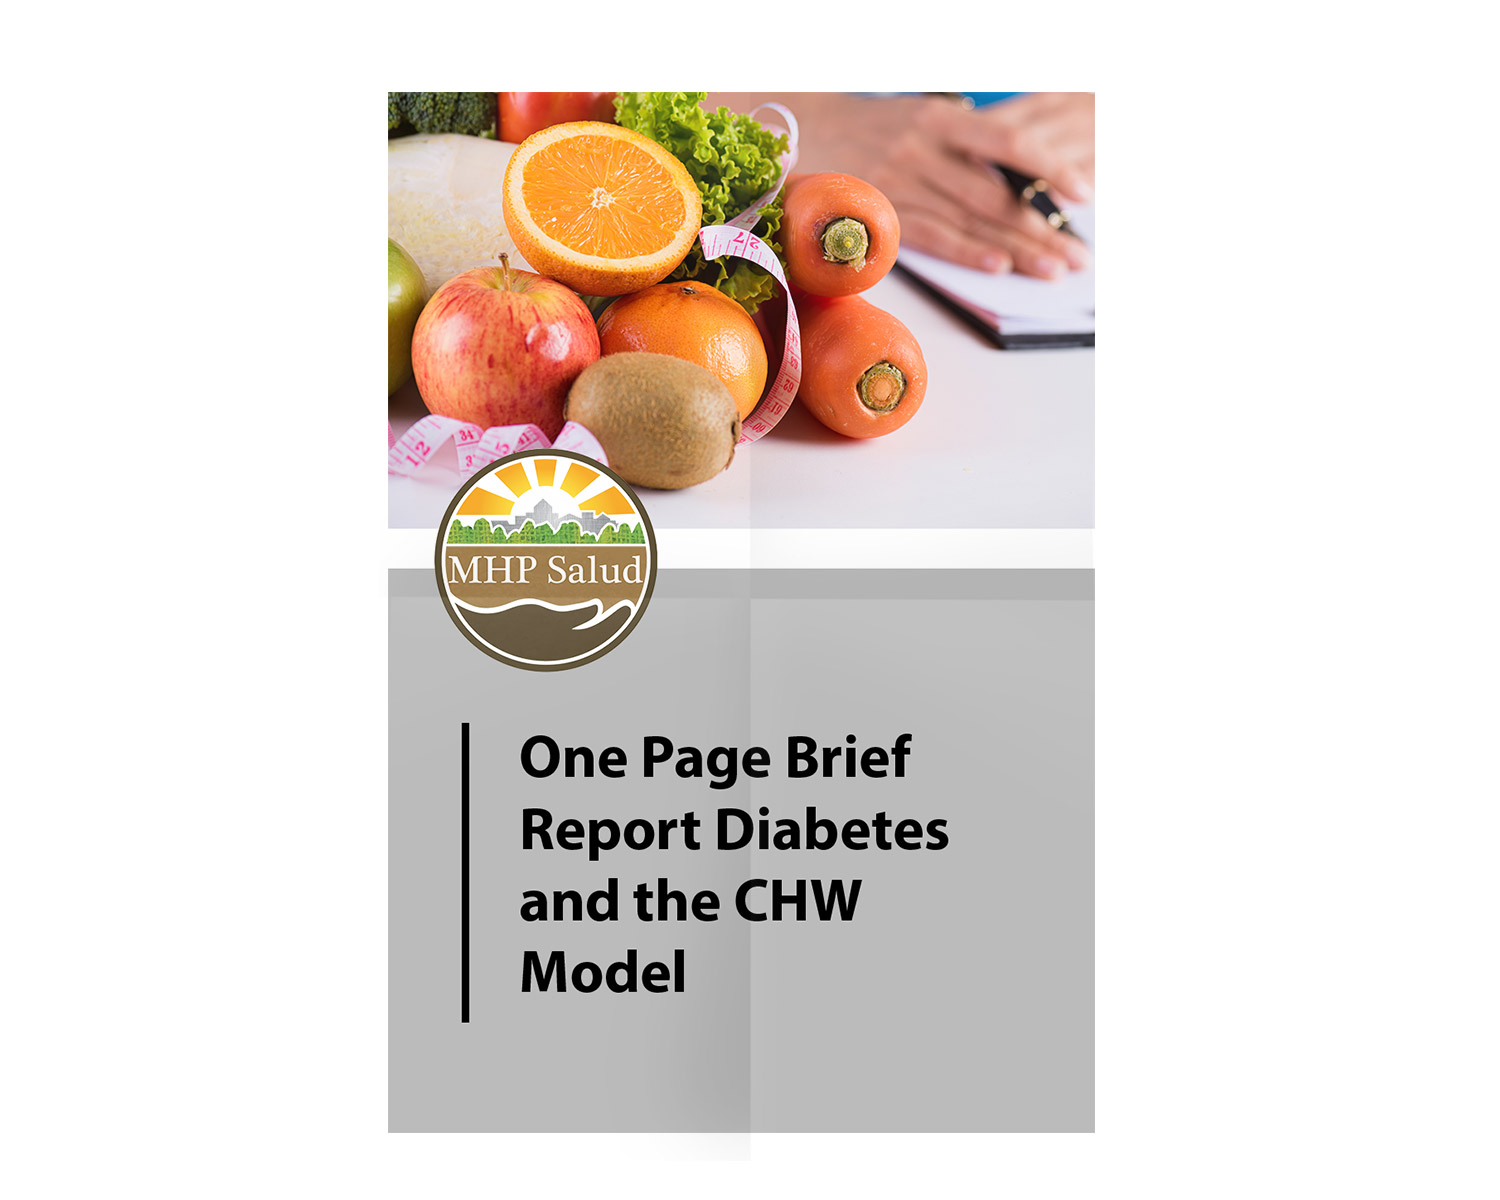 One Page Brief Report Diabetes and the CHW Model